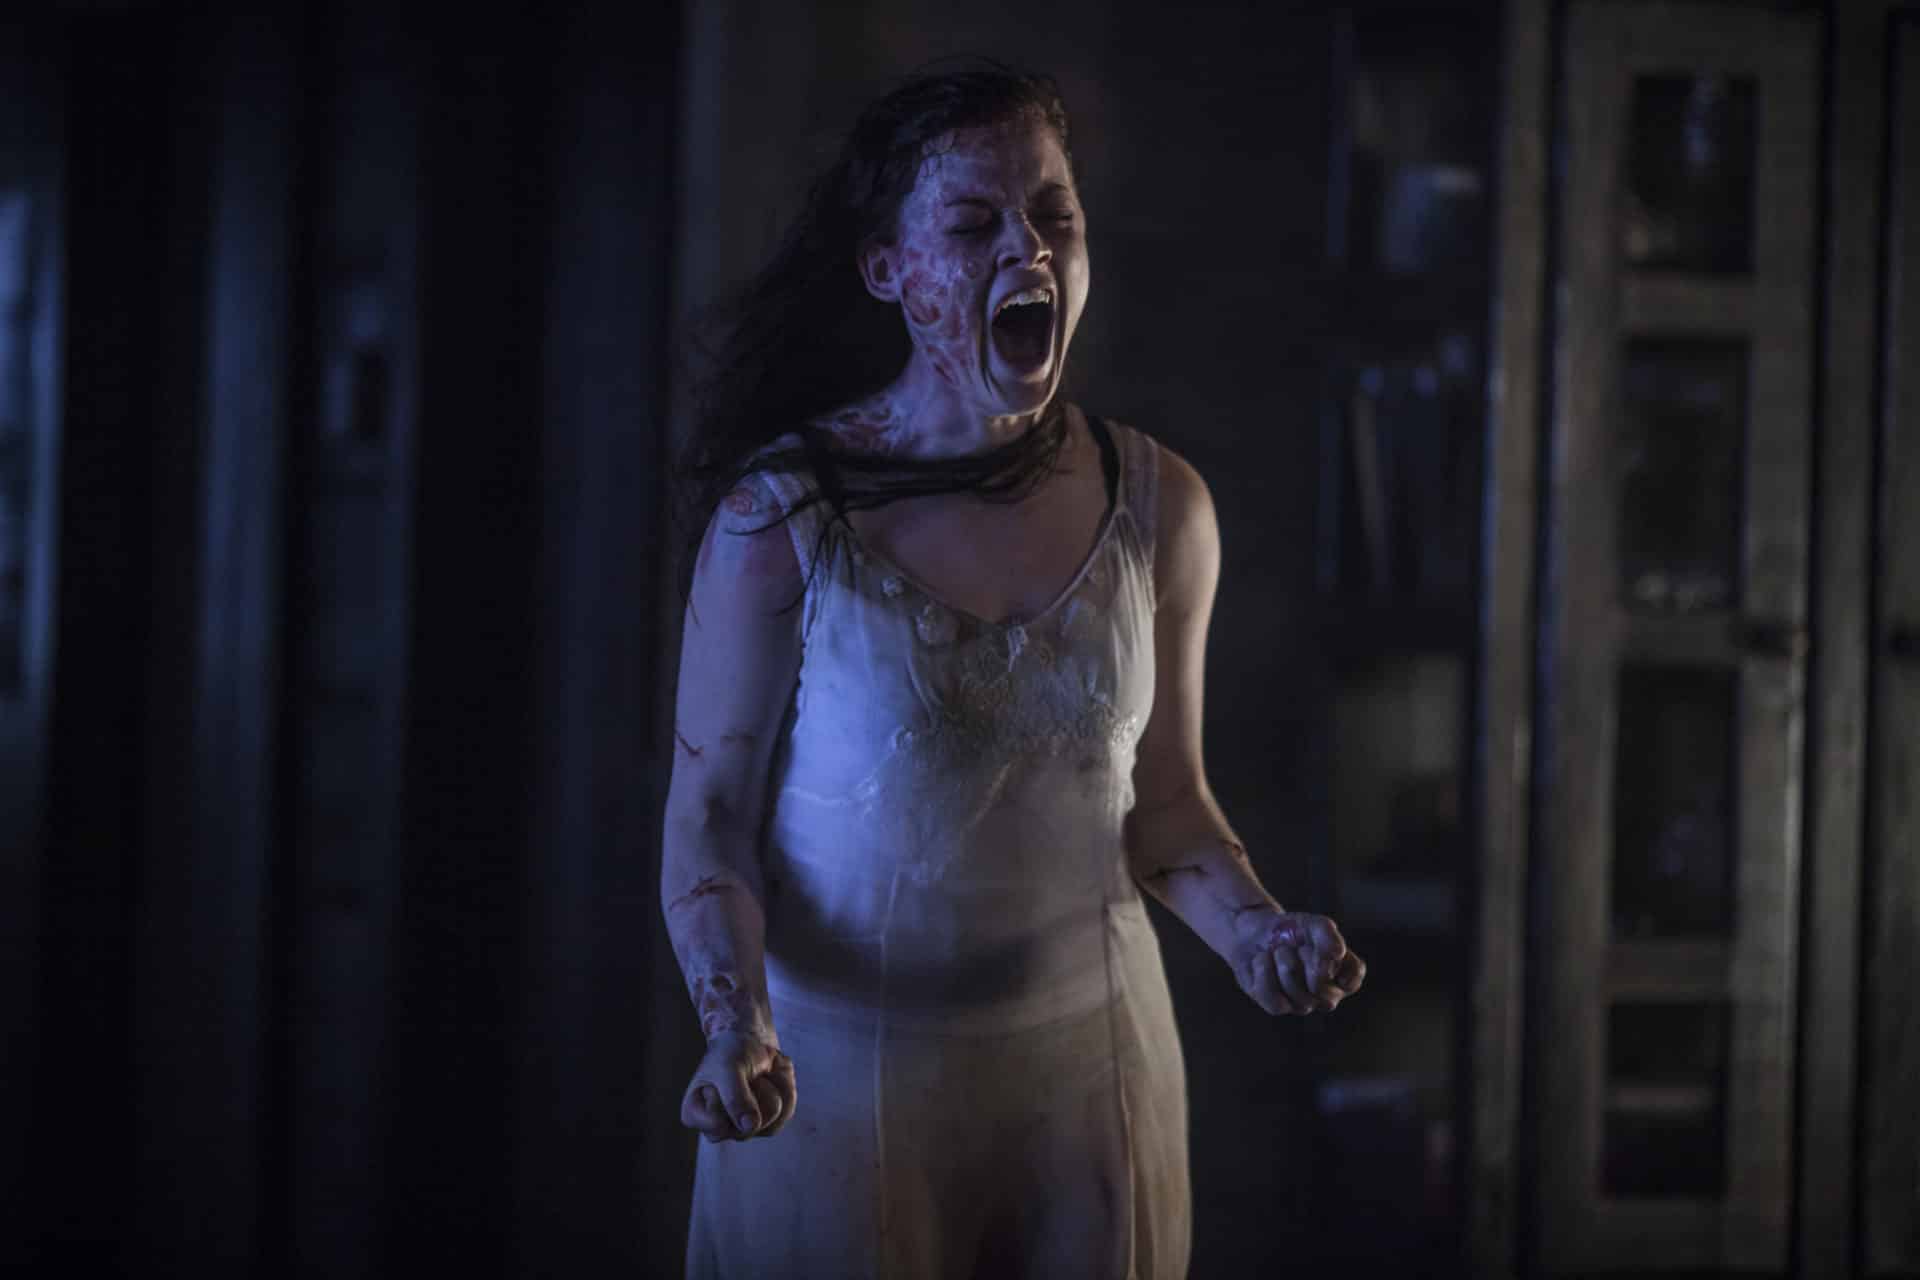 Evil Dead Rise' Review: a Gloriously Gory Sequel